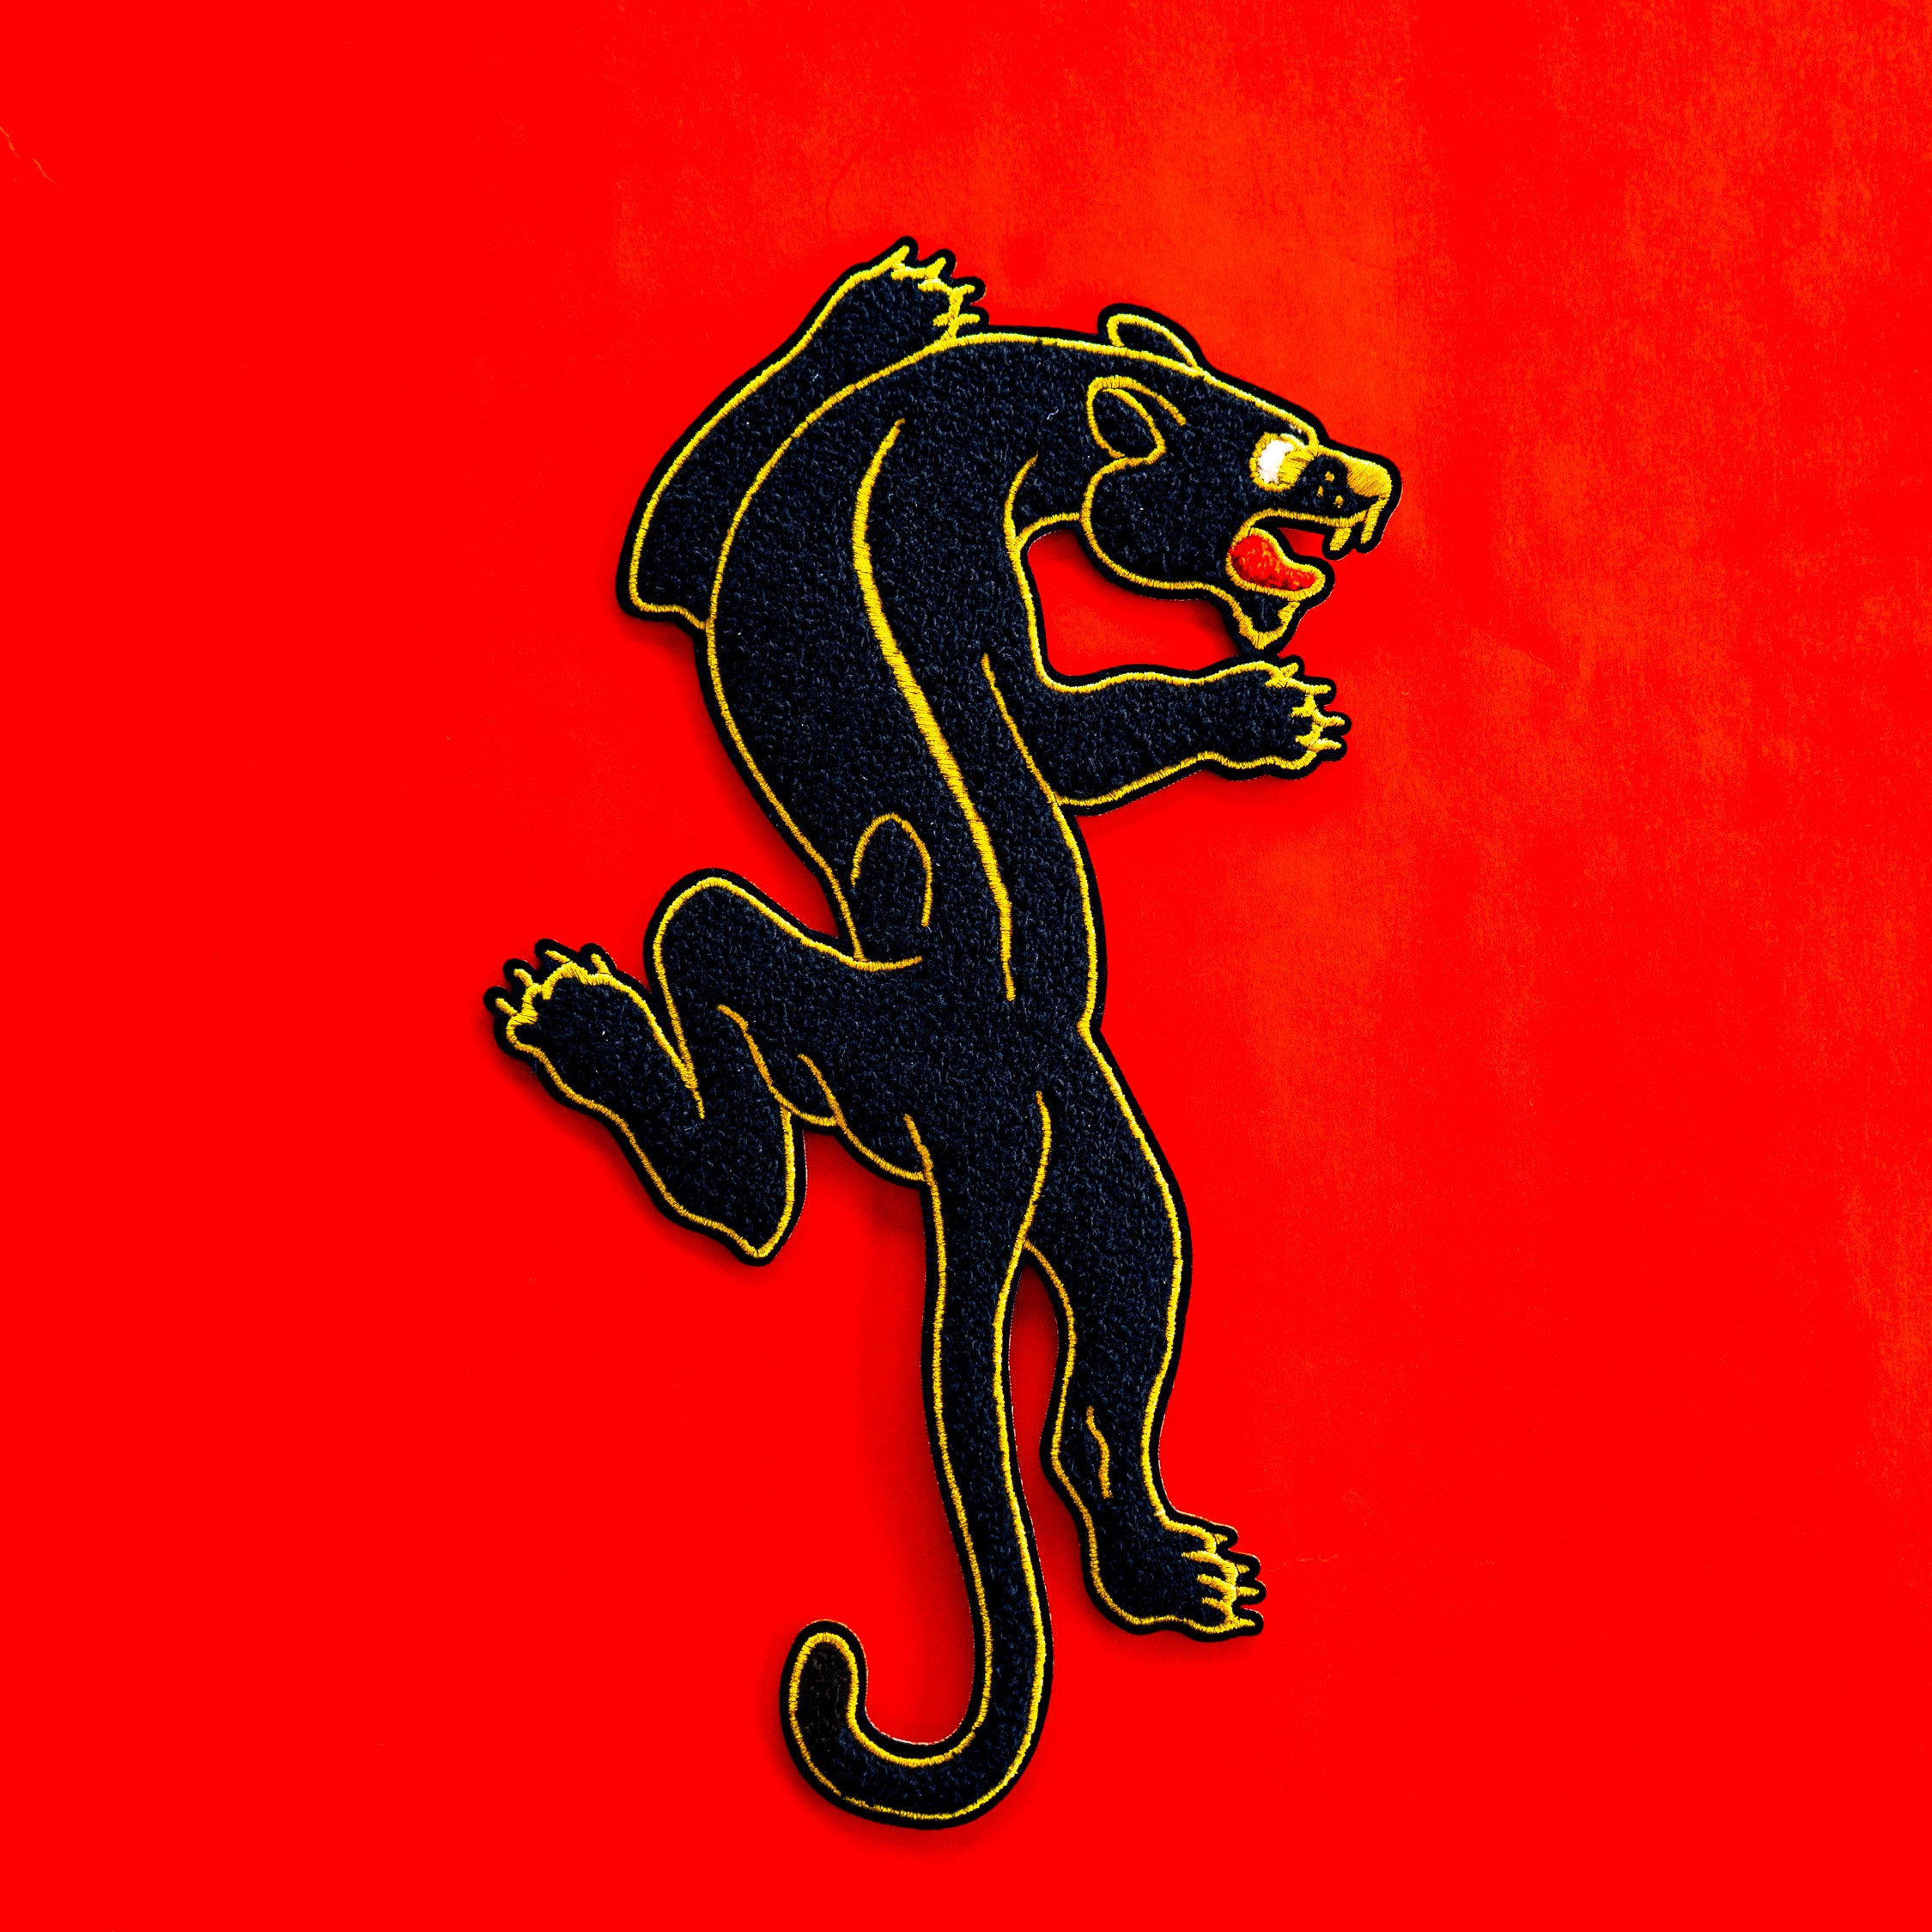 XL Chenille oversized back patch of classic Sailor Jerry style crawling panther. Patch is black chenille with red, and gold embroidery.  The photo shows the patch against a red background, highlighting the chenille texture.